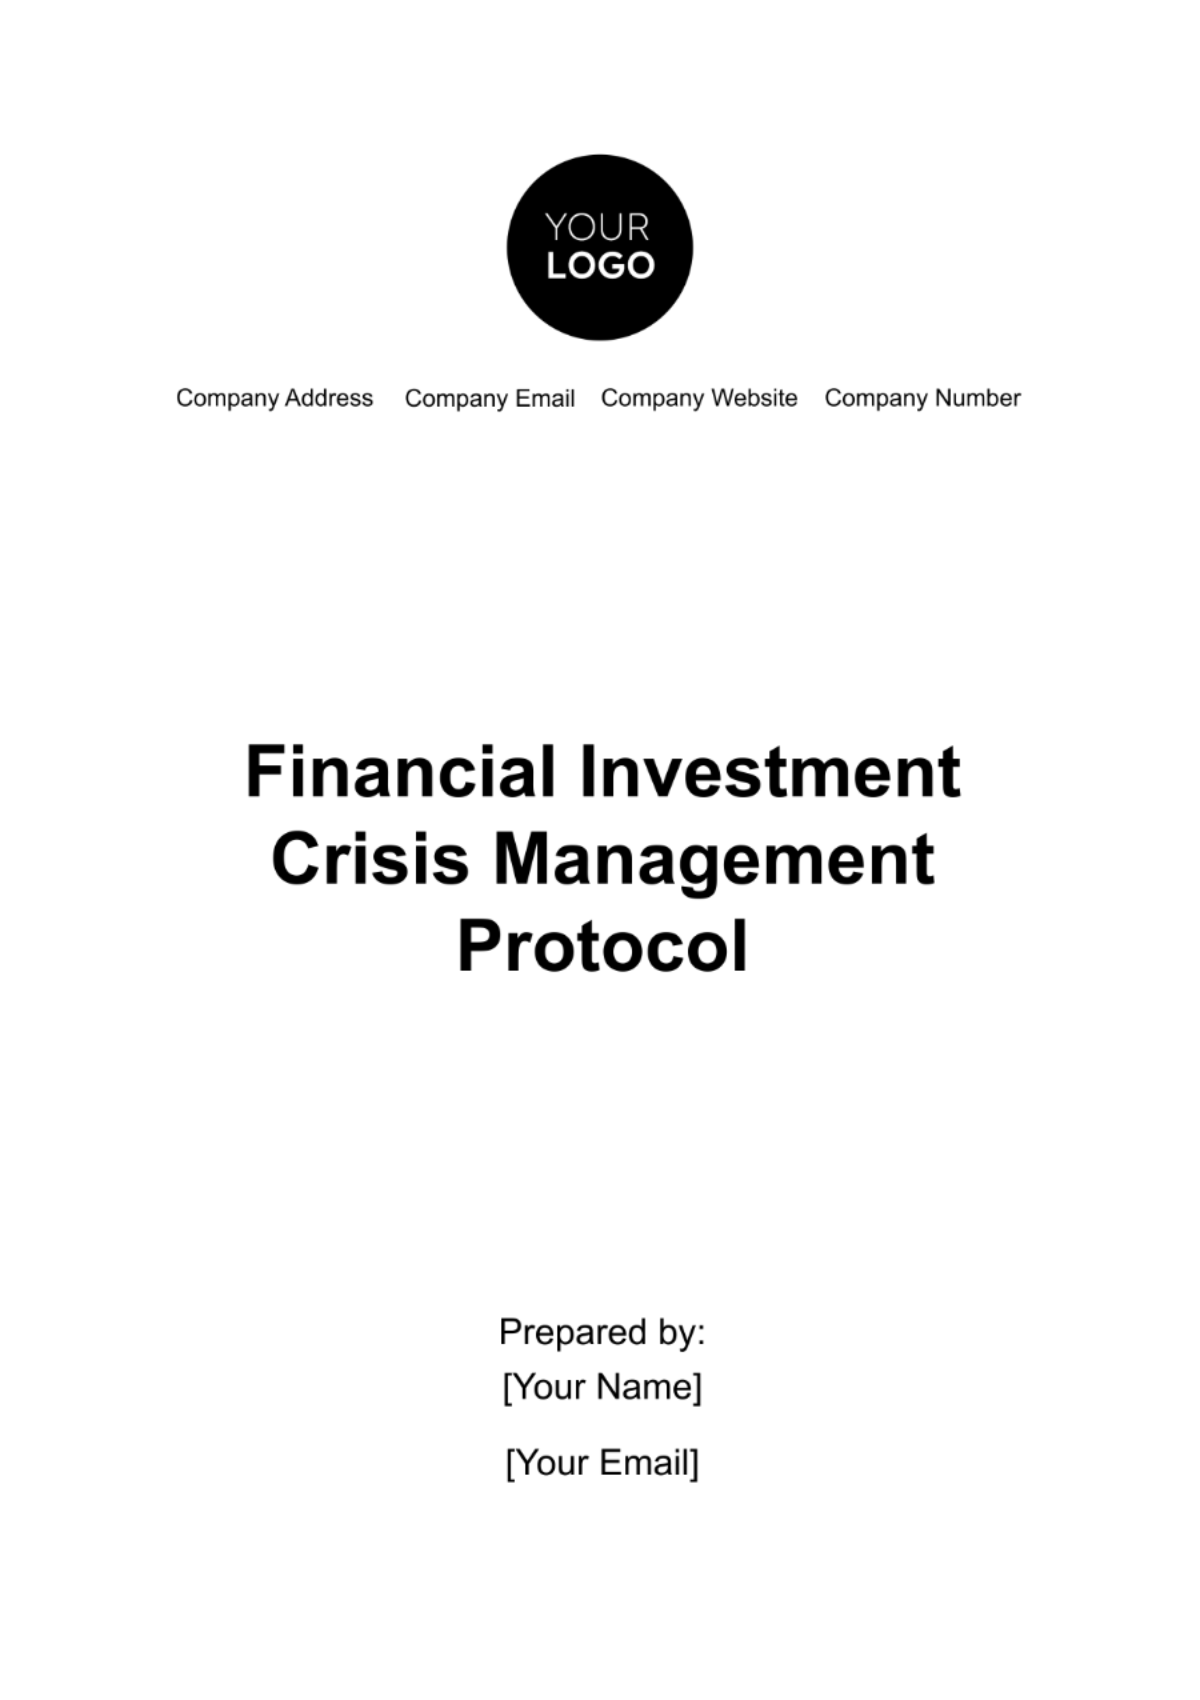 Financial Investment Crisis Management Protocol Template